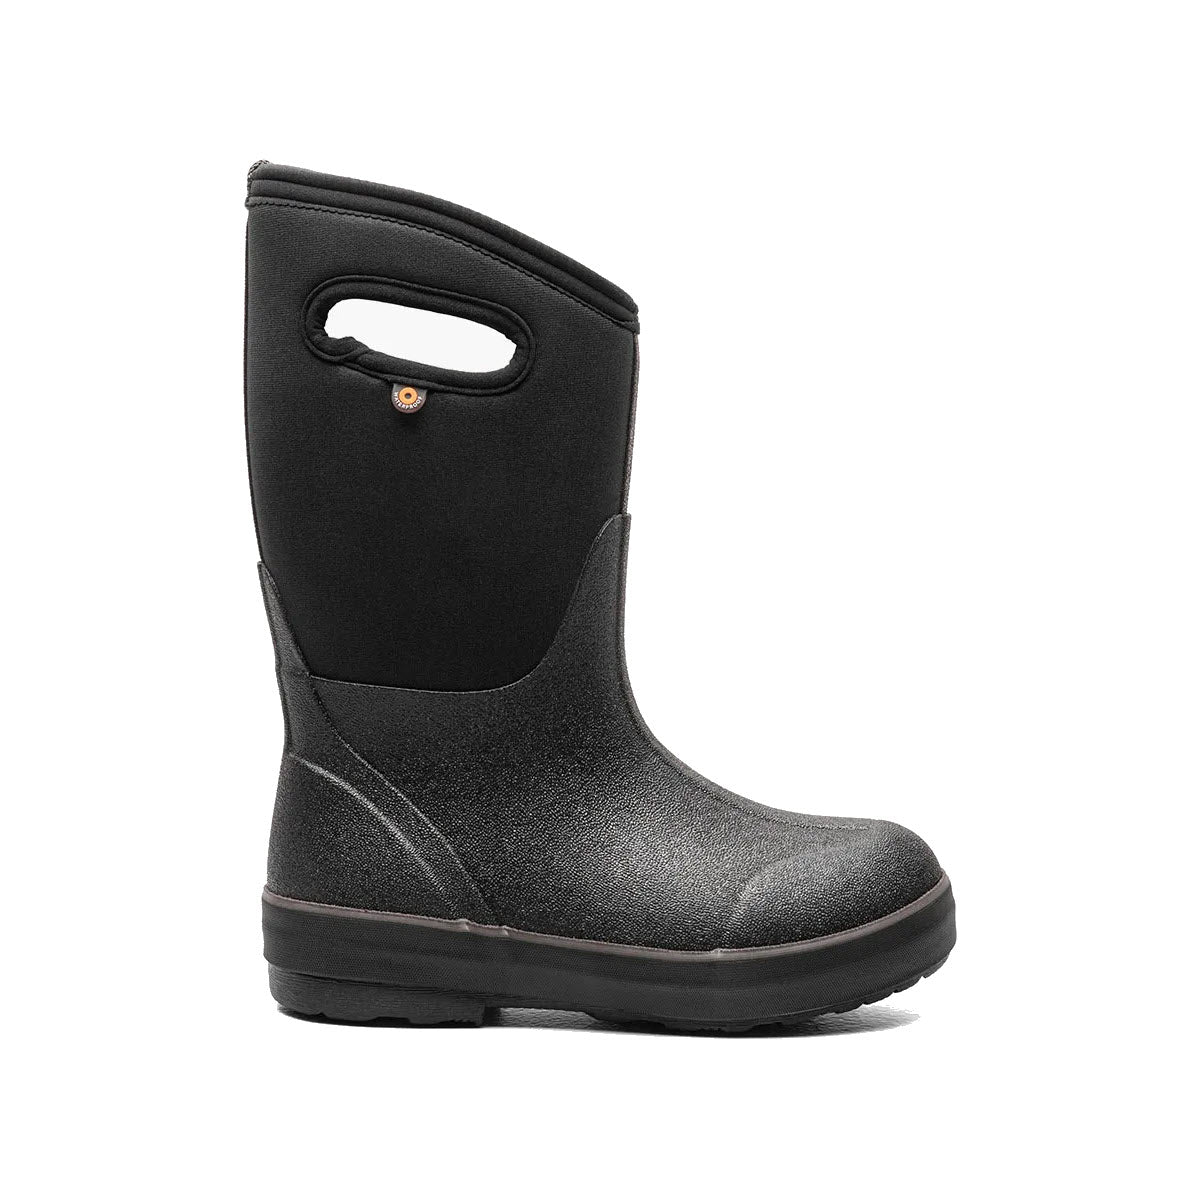 A black, 100% waterproof winter boot with a handle cutout for easy wearing and Neo-Tech insulation - Bogs Classic II Solid Black Kids.